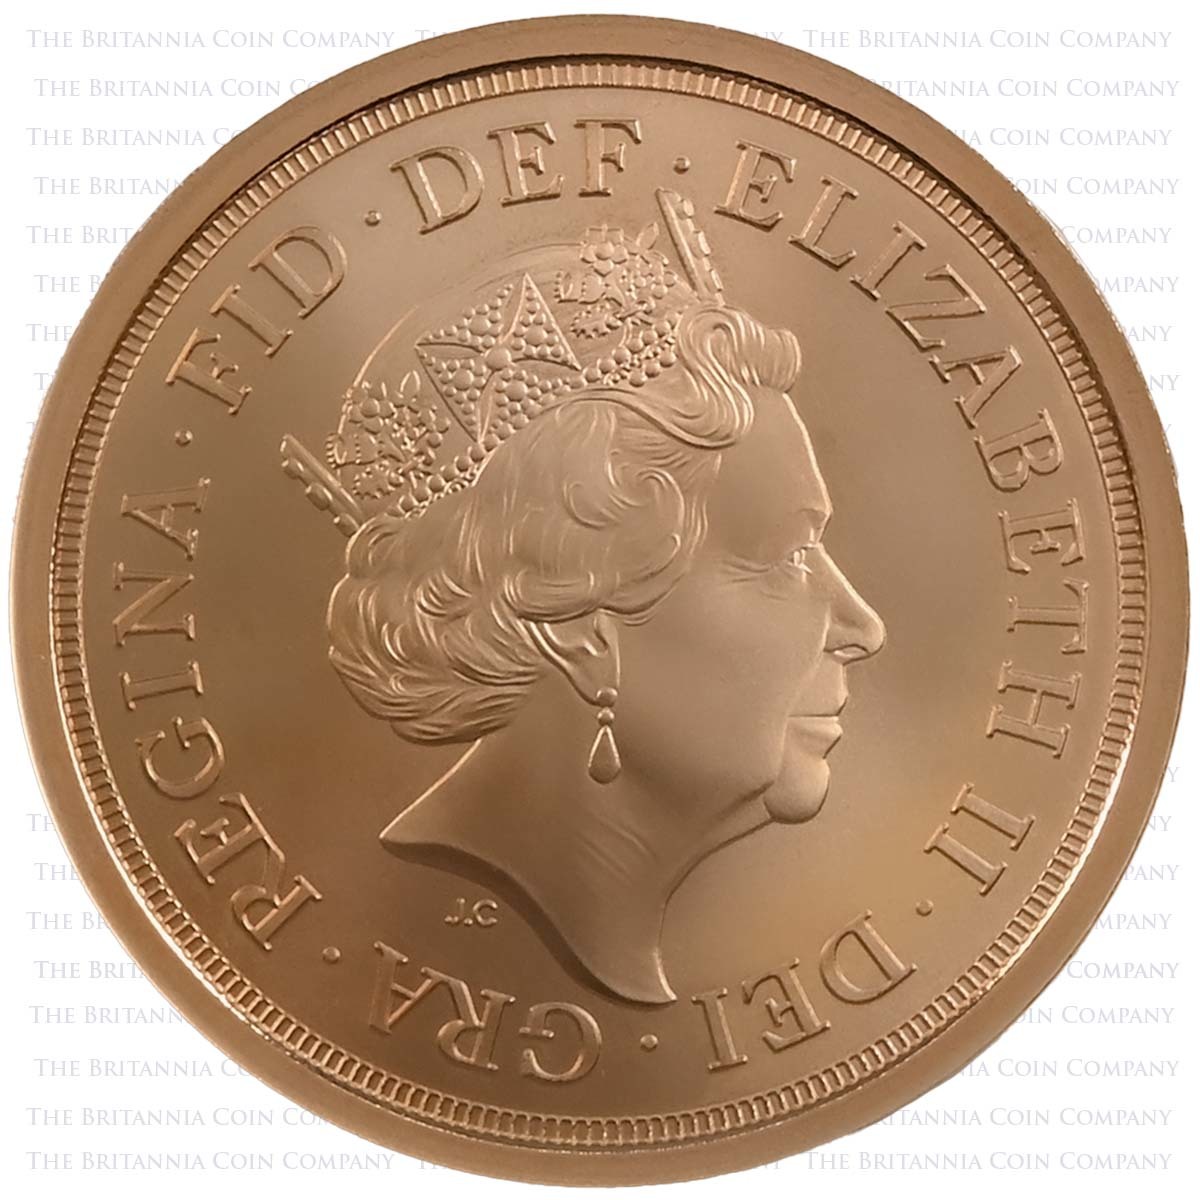 VC19STD 2019 Struck On The Day Sovereign Queen Victoria Obverse